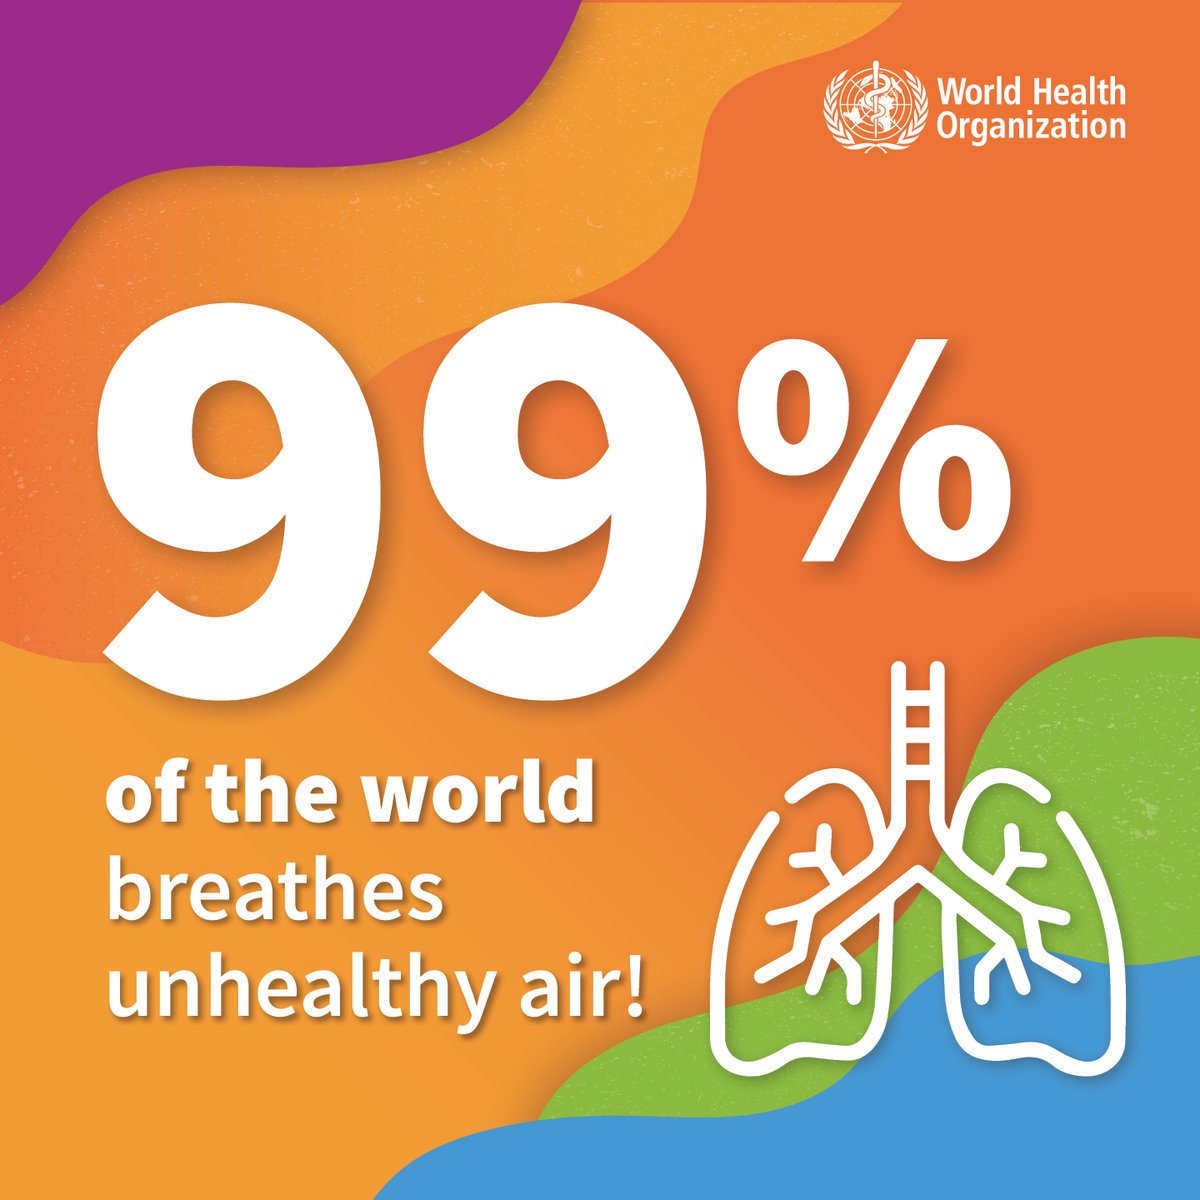 😷 #AirPollution is a silent killer, increasing the risk of serious health issues such as: ‼️ Stroke ‼️ Asthma ‼️ Heart Disease ‼️ Lung Cancer We must take #ClimateAction for cleaner, healthier communities.